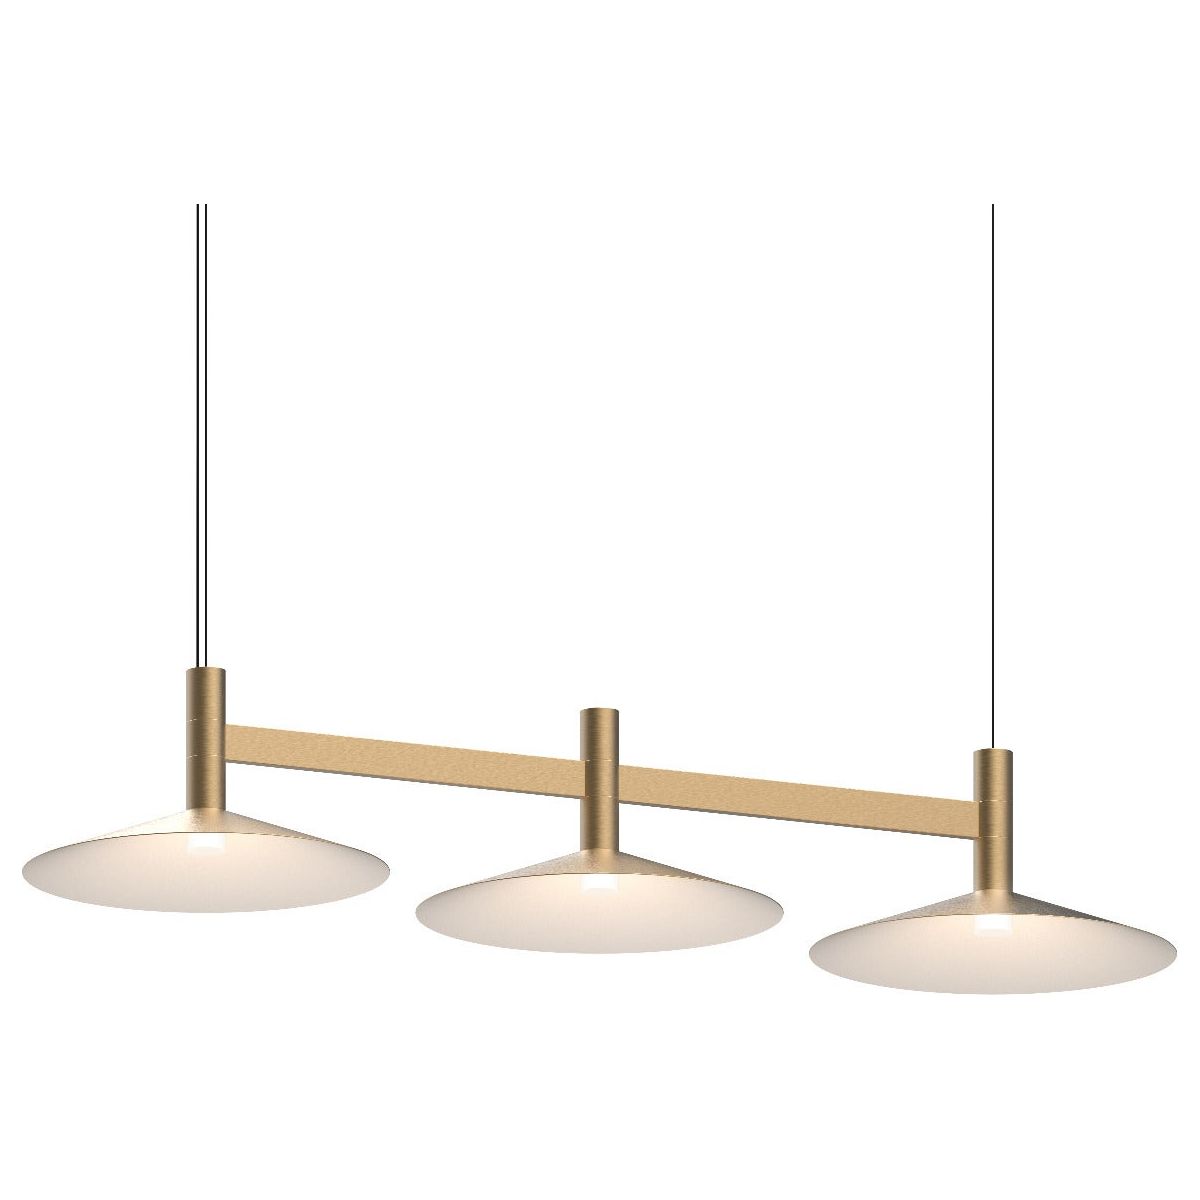 Systema Staccato 3-Light Linear Pendant with Shallow Cone Shades